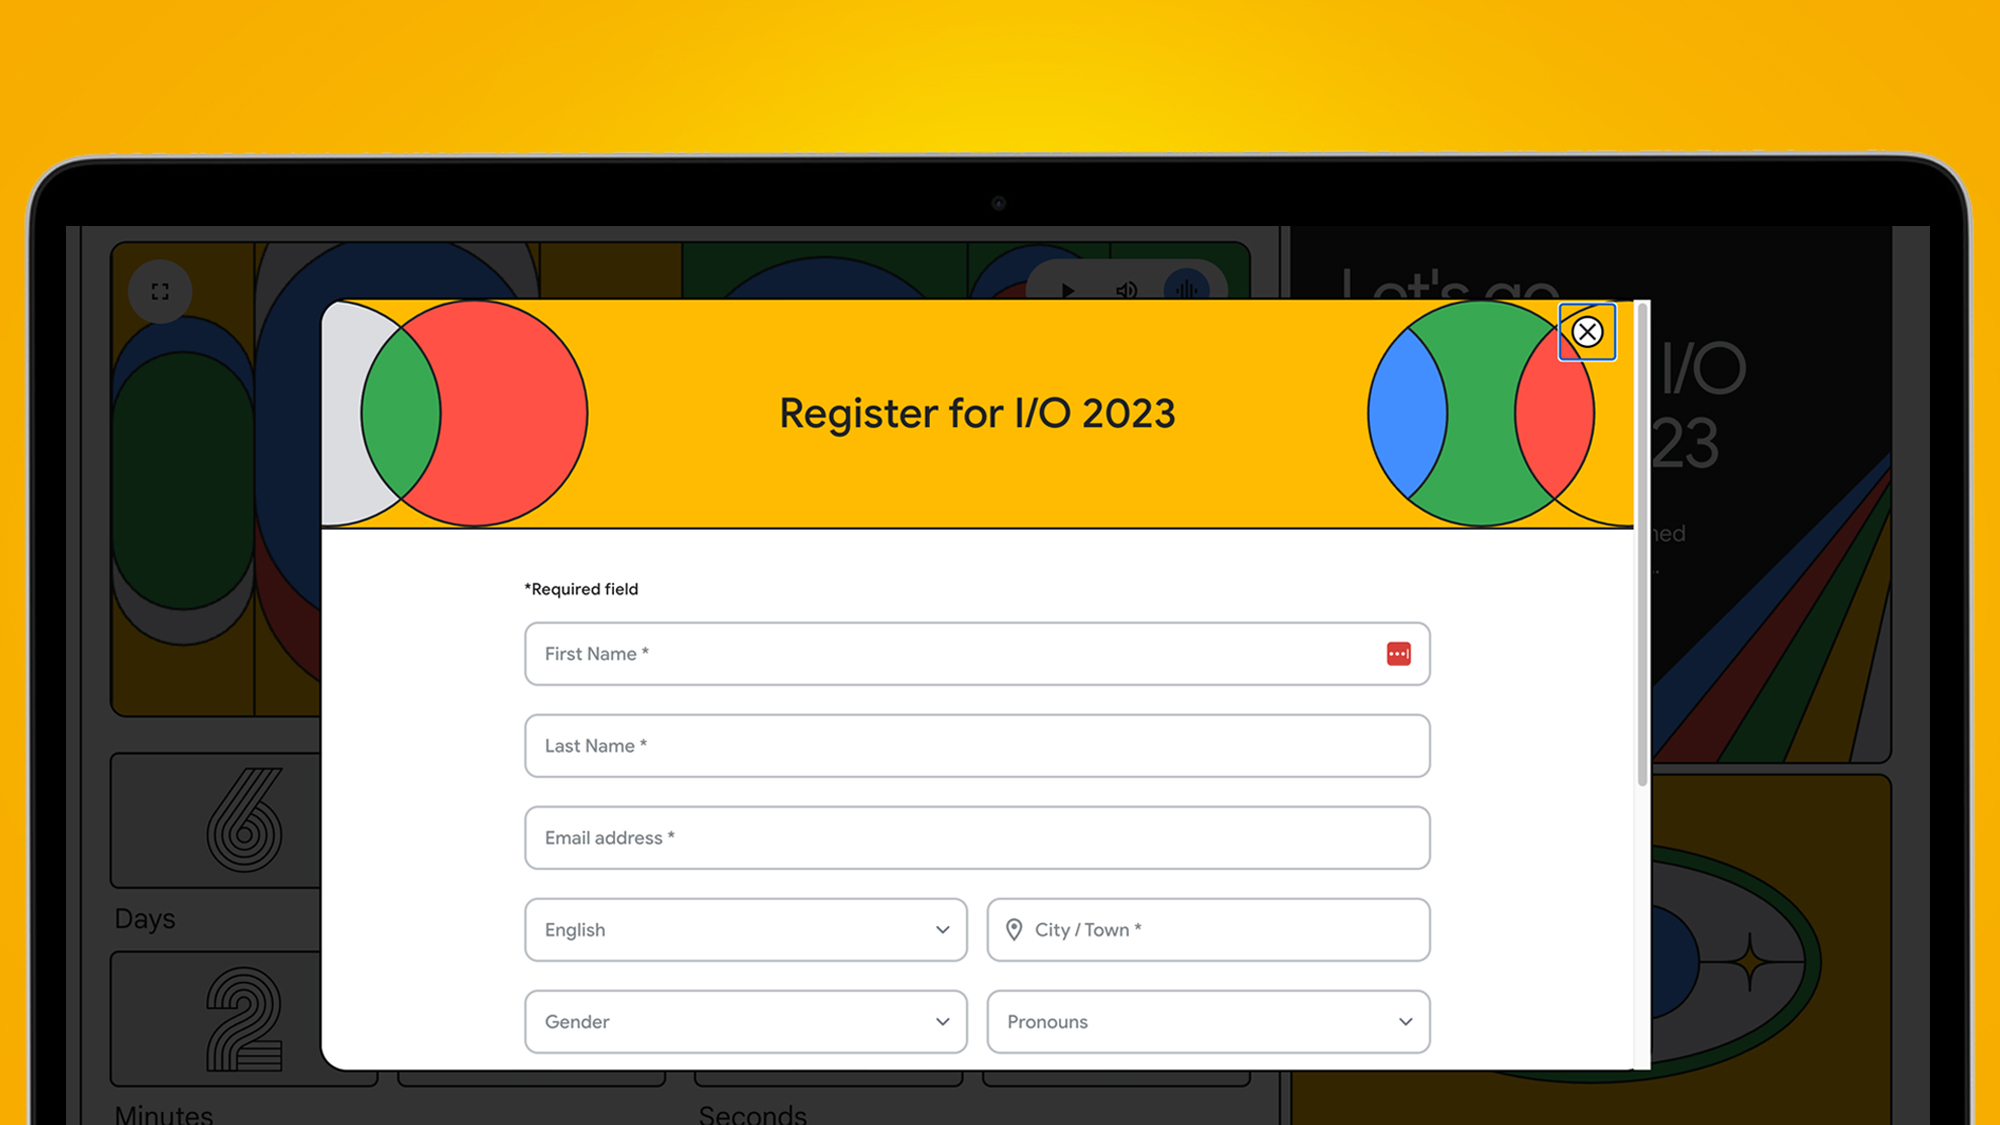 Laptop screen with orange background showing registration page for Google IO 2023